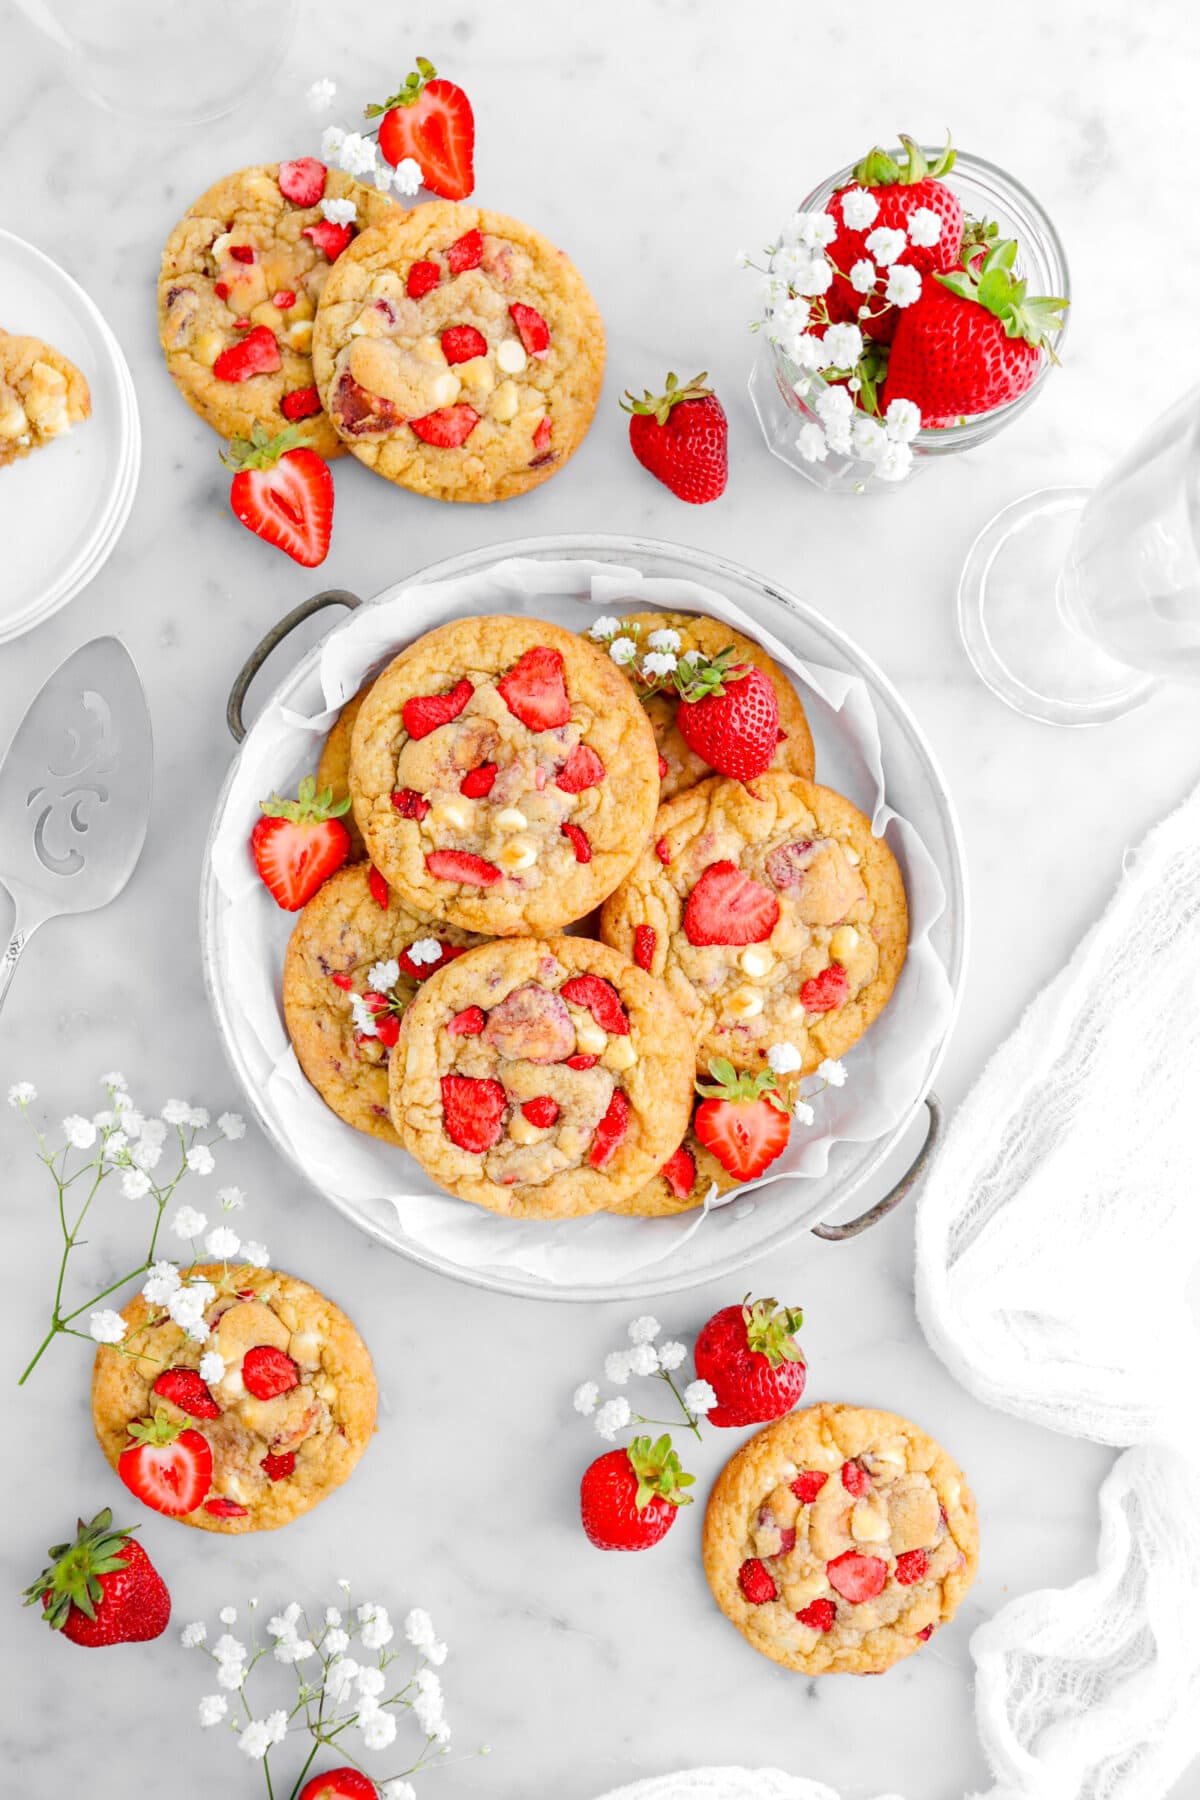 six cookies in pie plate with four more cookies around, white flowers, and strawberries on marble surface with cheesecloth and cake knife beside.